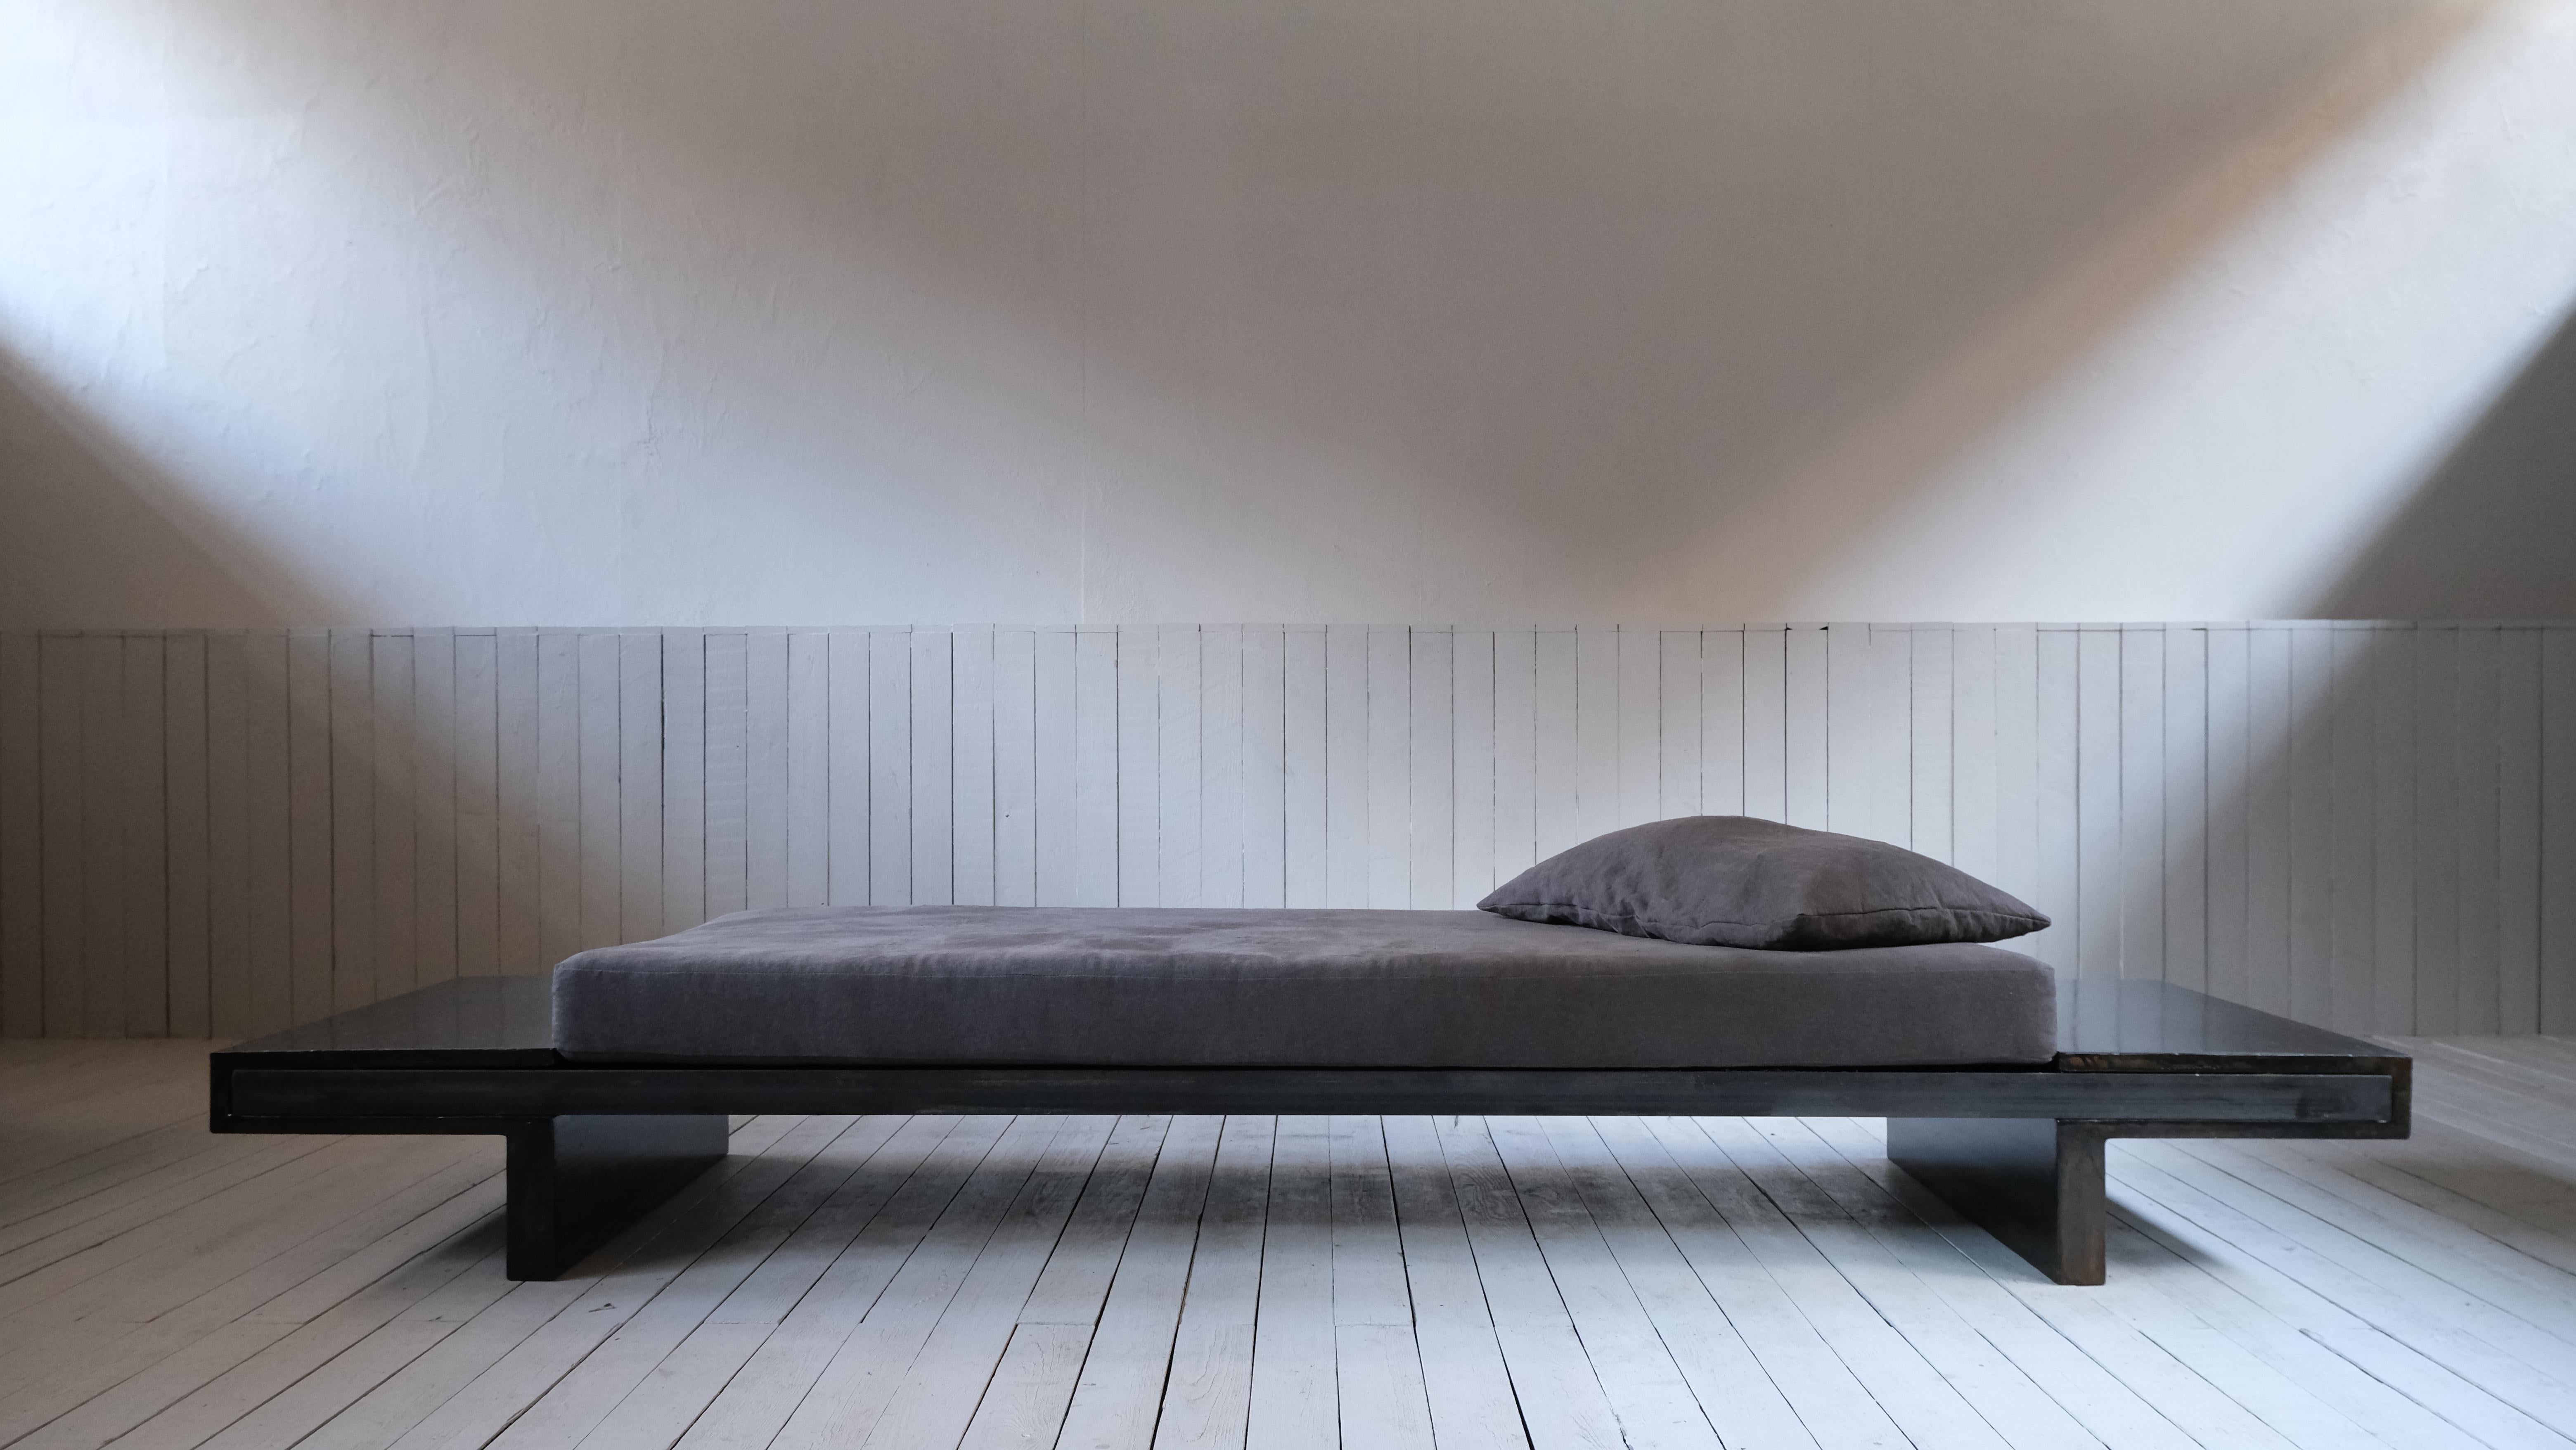 Daybed by Arno Declercq
Limited Edition of 8
Dimensions: D 285 x W 80 cm x H 40 cm
Materials: Belgian linen & patinated steel
Signed by Arno Declercq

Arno Declercq
Belgian designer and art dealer who makes bespoke objects with passion for design,